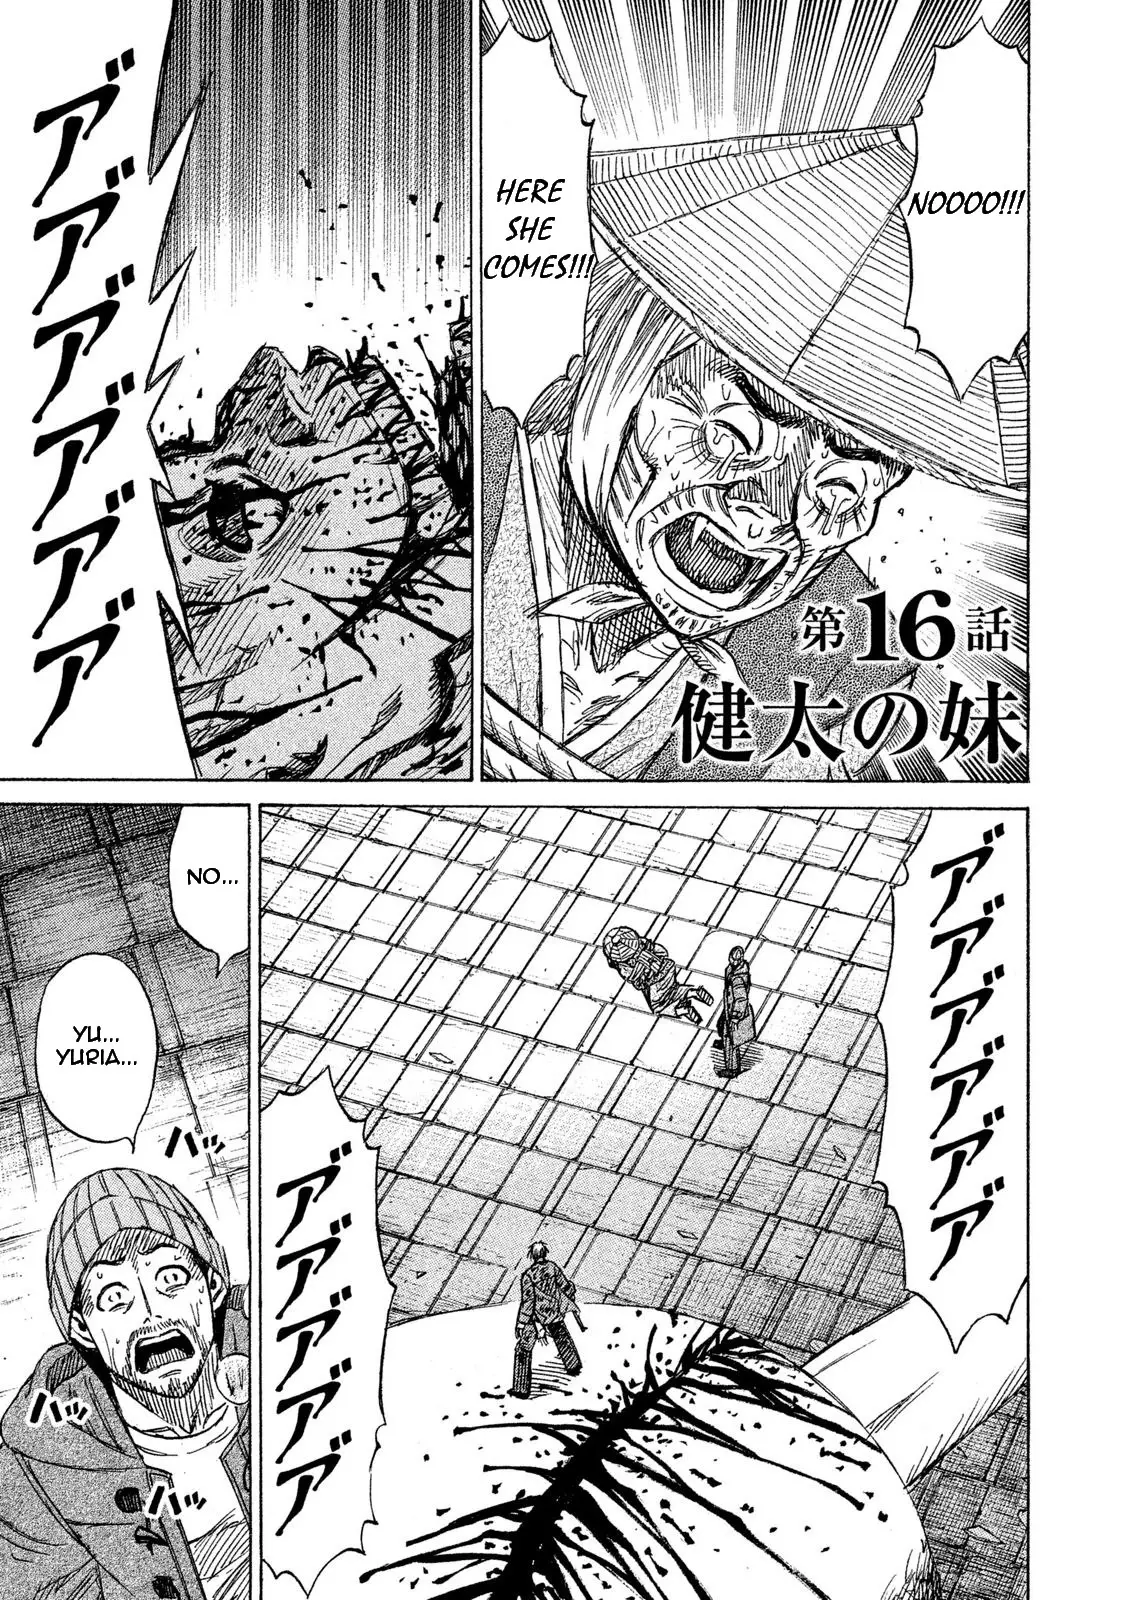 Higanjima - 48 Days Later - 16 page 2-c986225d